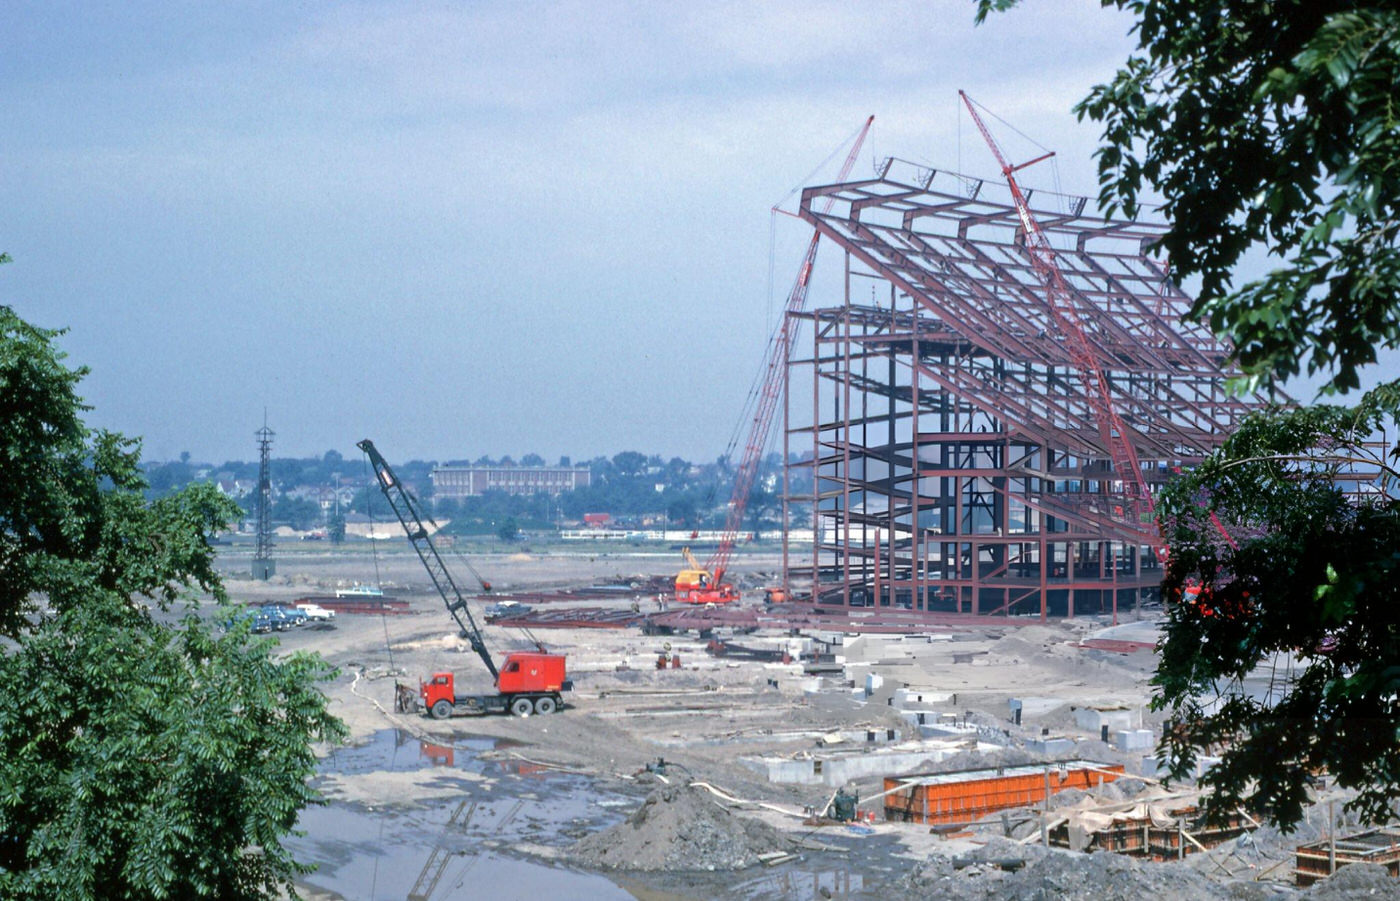 Construction Begins On The Municipal Stadium At Flushing Meadows, Later Named Shea Stadium, In Corona, 1960S.